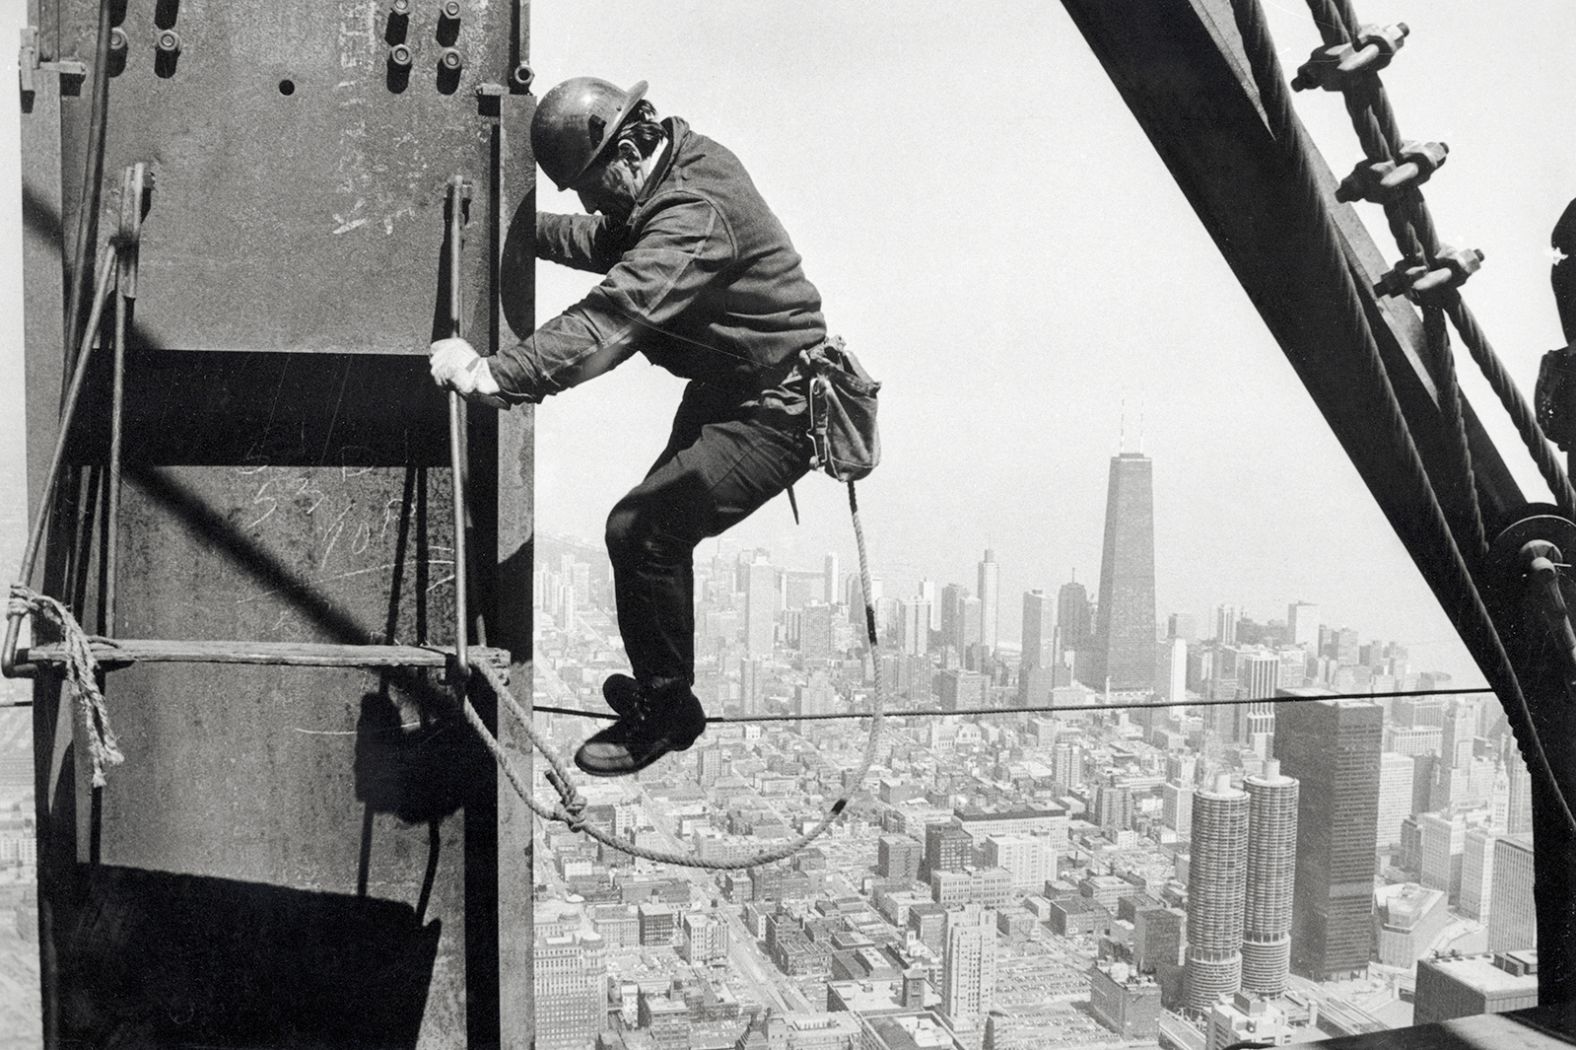 An iron worker helps construct the Sears Tower in Chicago. Sears' new headquarters, built in 1973, was the world's tallest building until 1998. Sears sold the building in 1994.